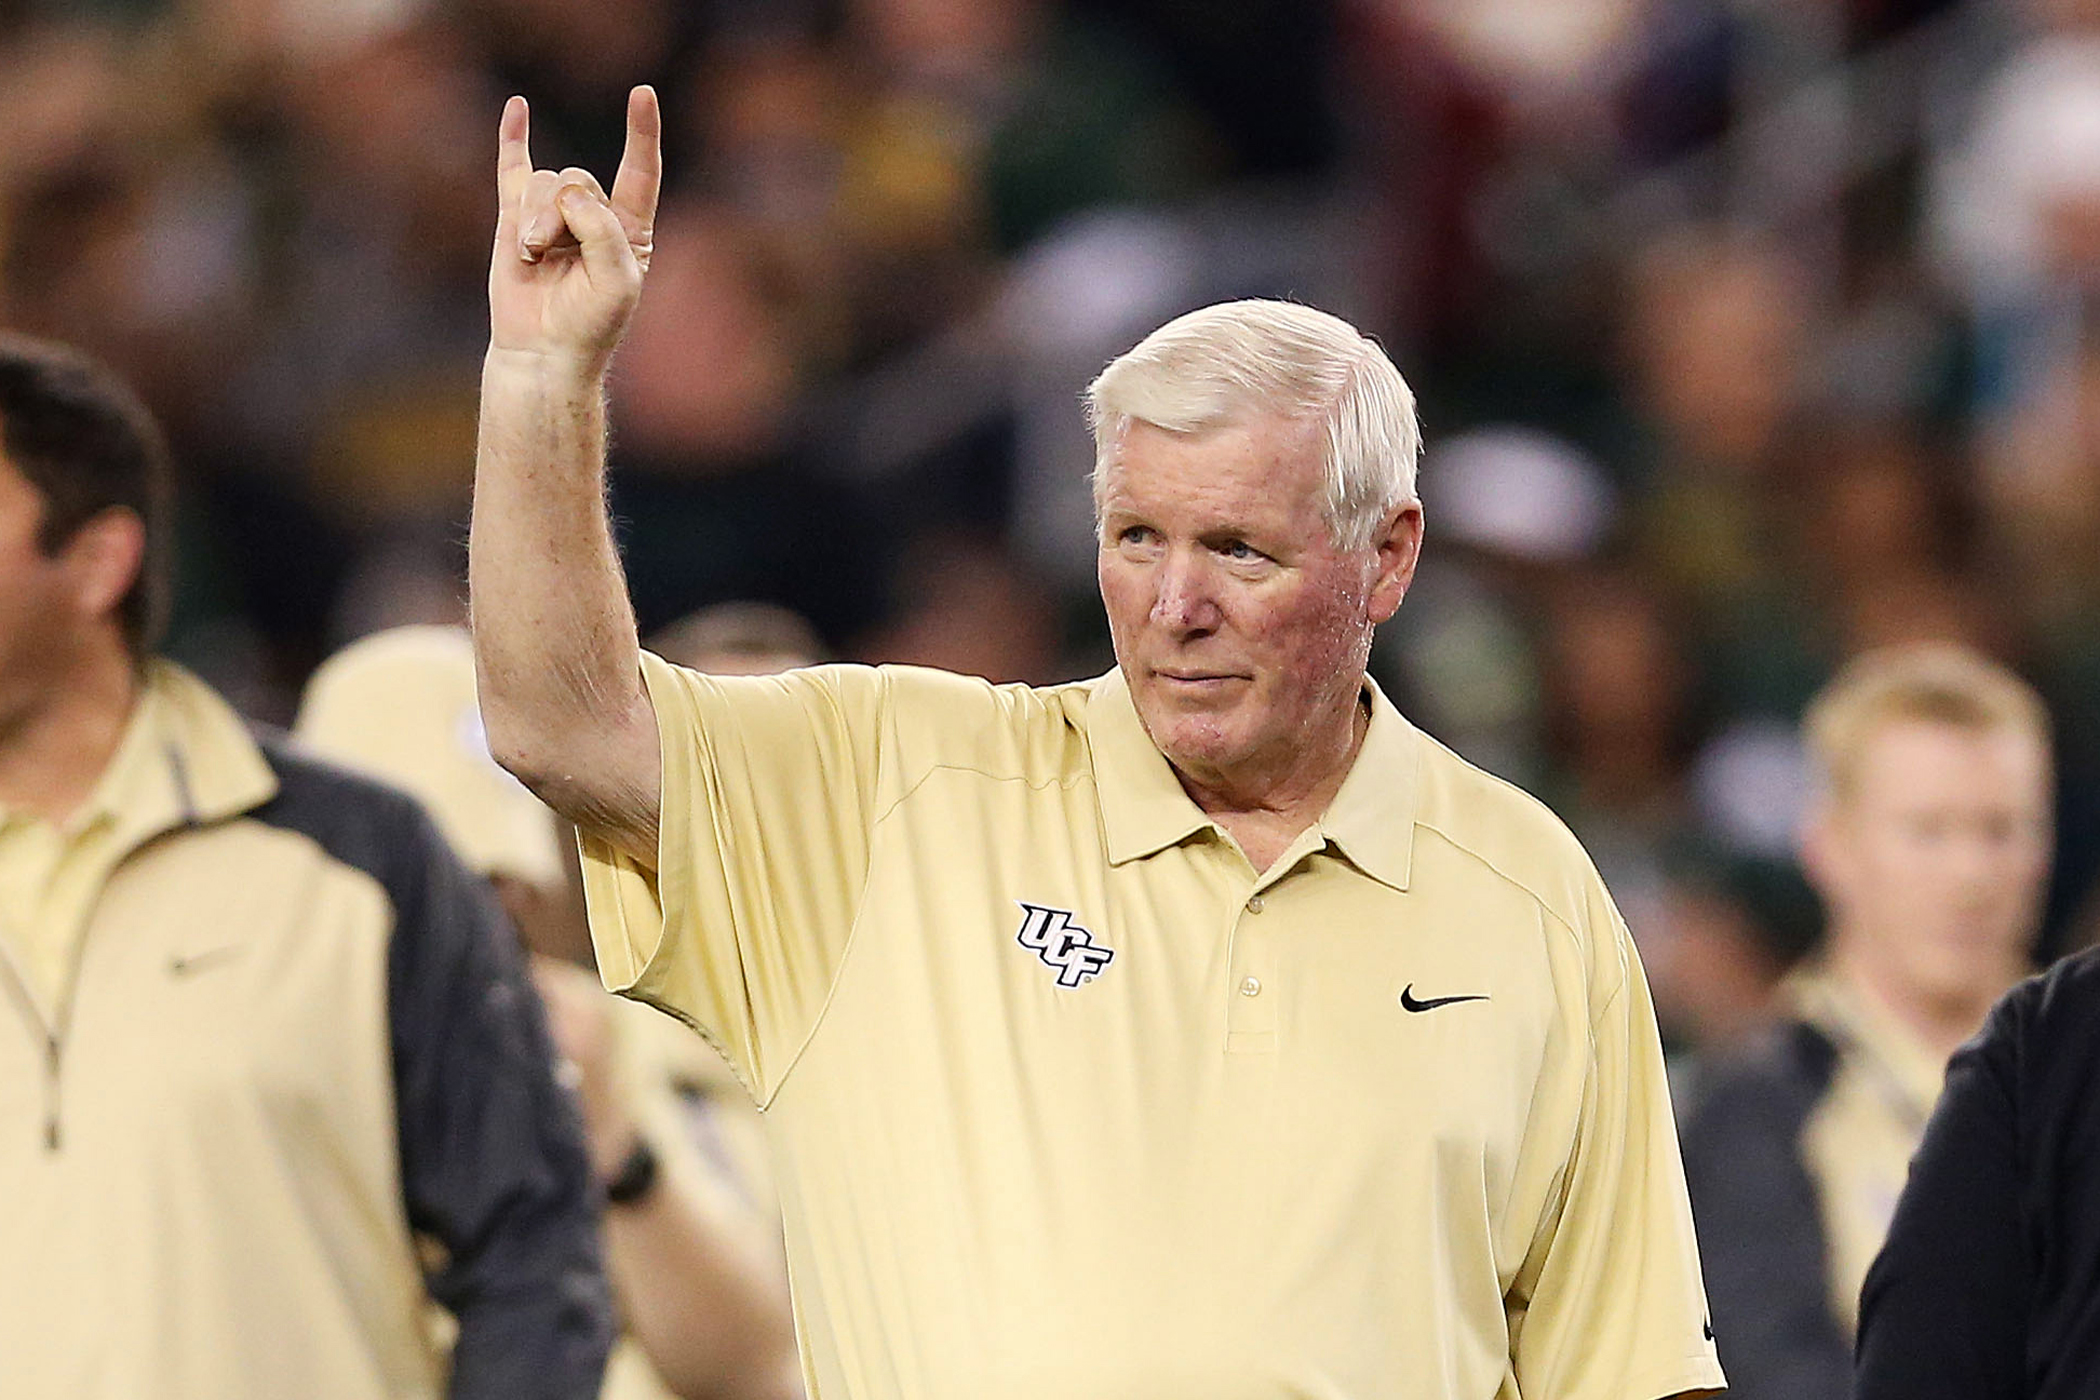 Head coach George O'Leary of the UCF Knights gestures during their 52 to 42 win over the Baylor Bears in the Tostitos Fiesta Bowl at University of Phoenix Stadium on January 1, 2014 in Glendale, Arizona.